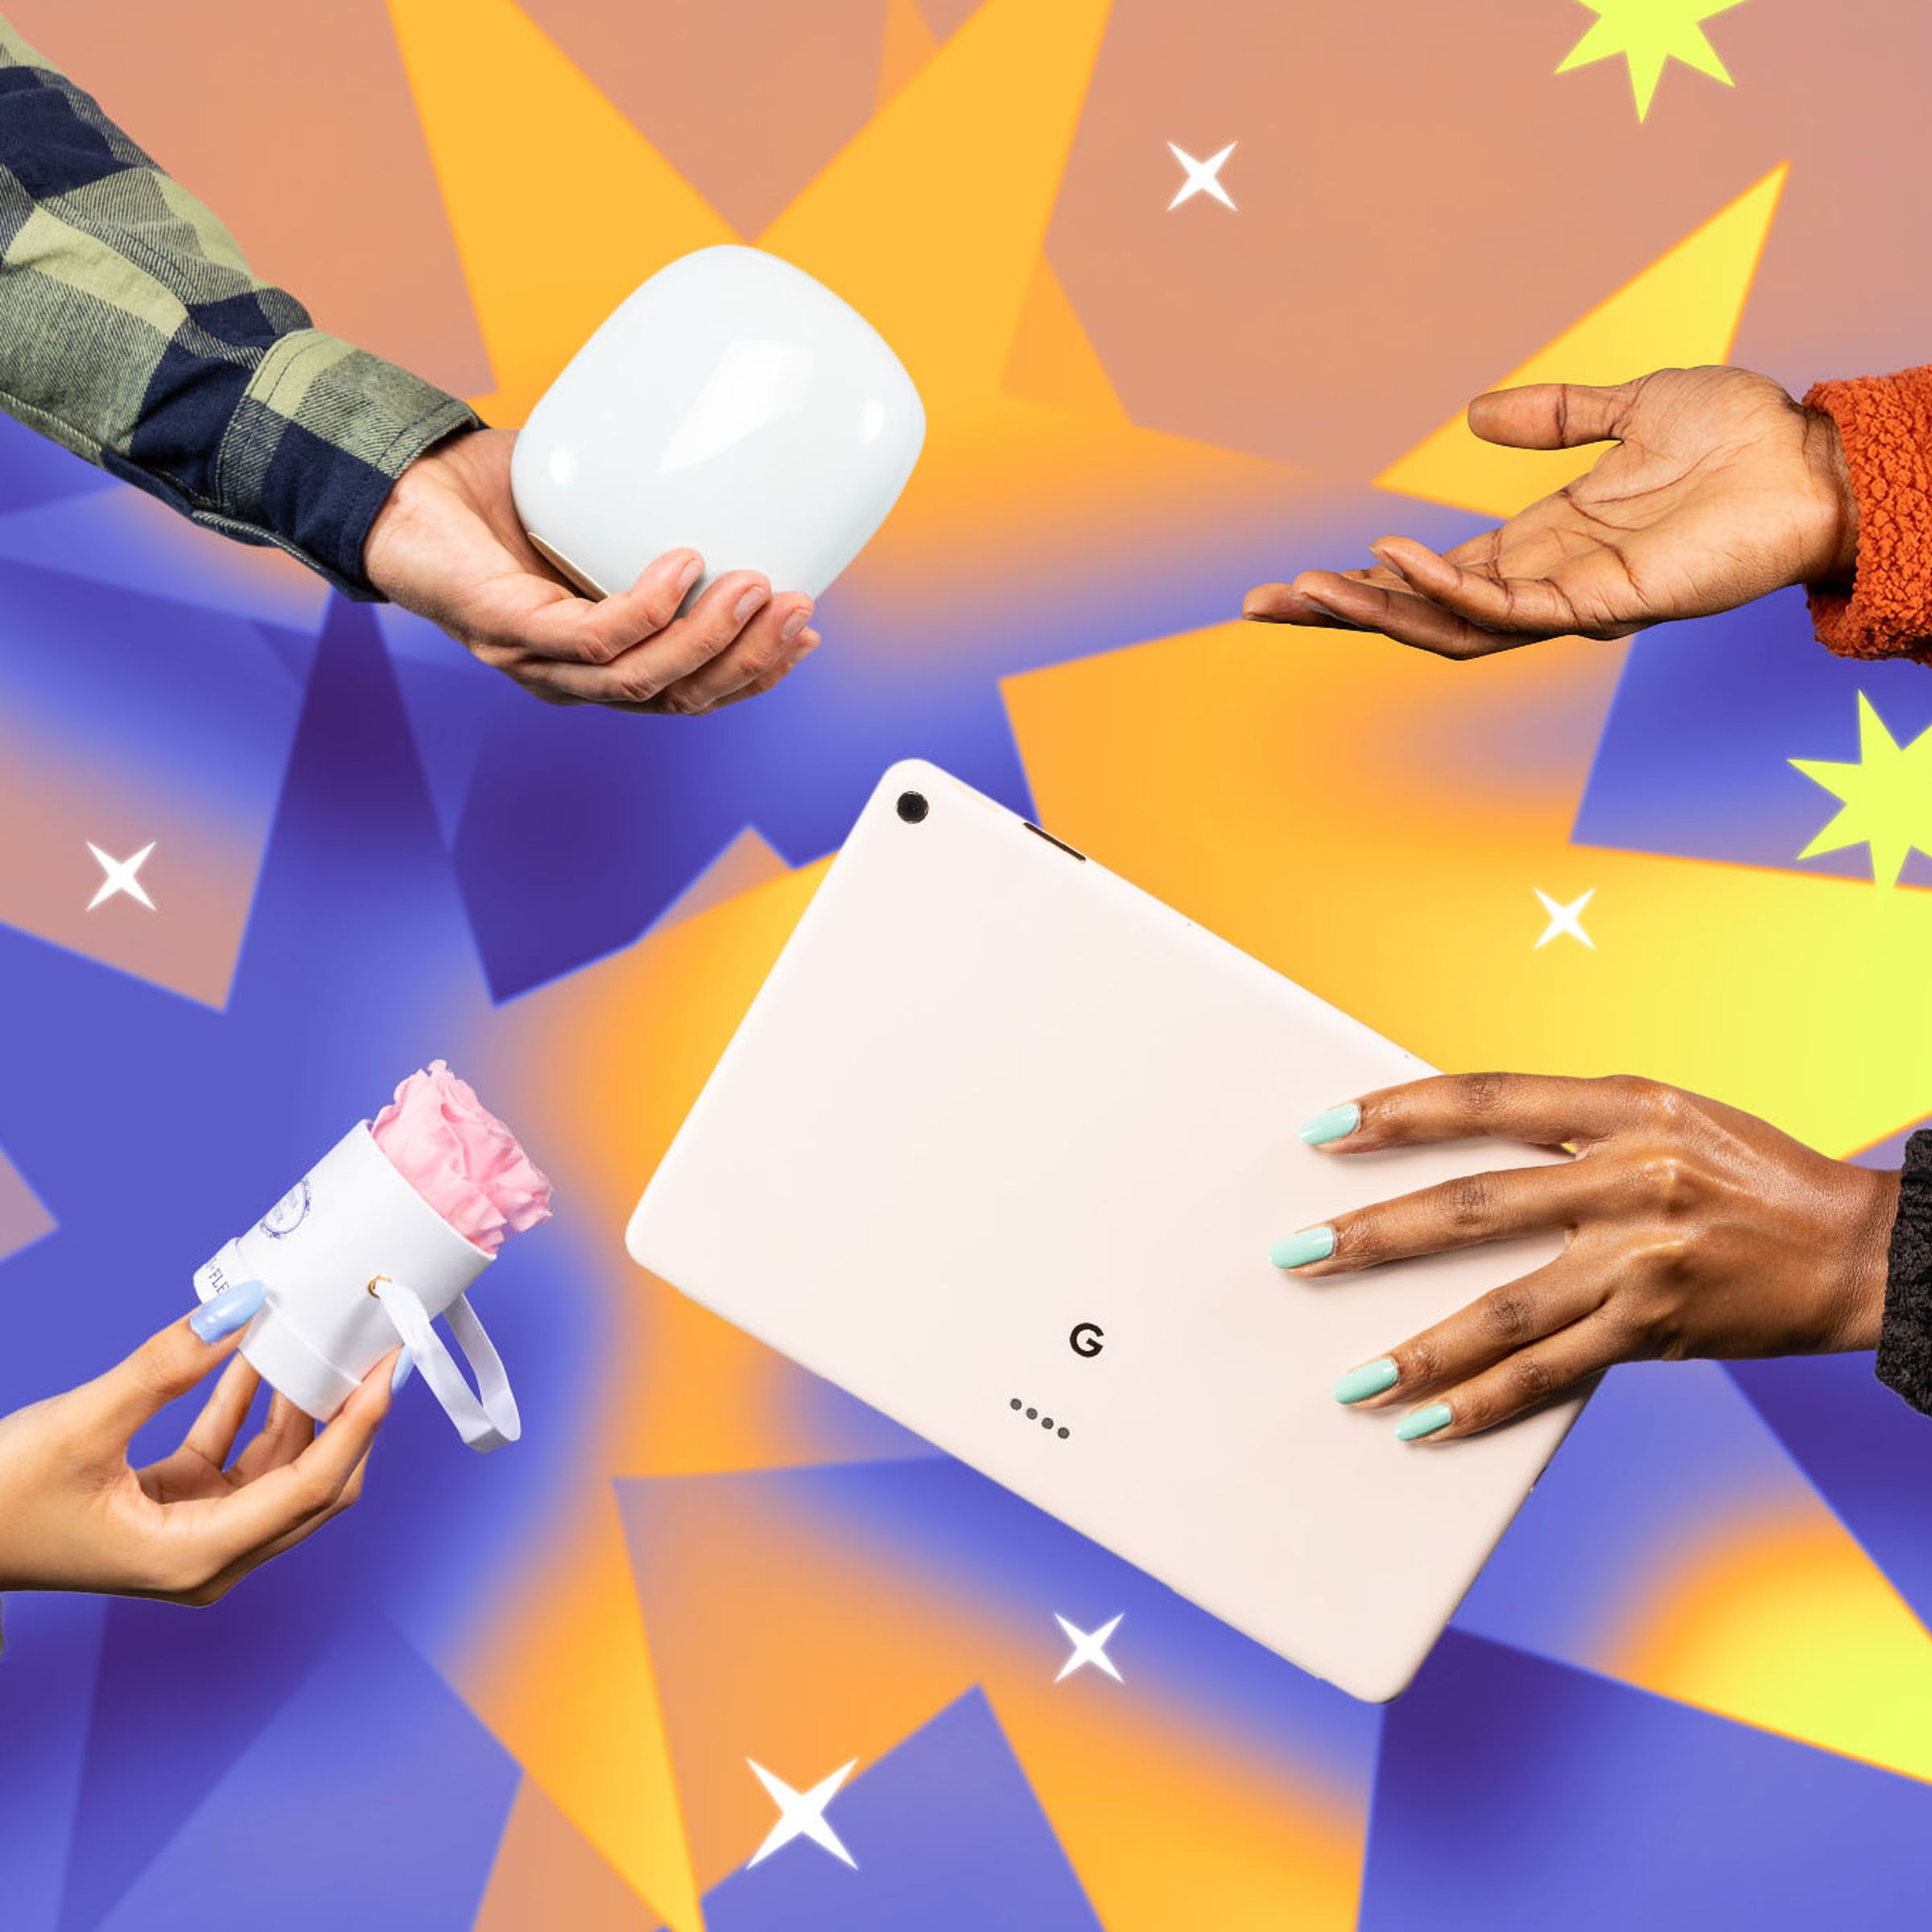 Hands holding different products on a graphic background of brightly colored stars.